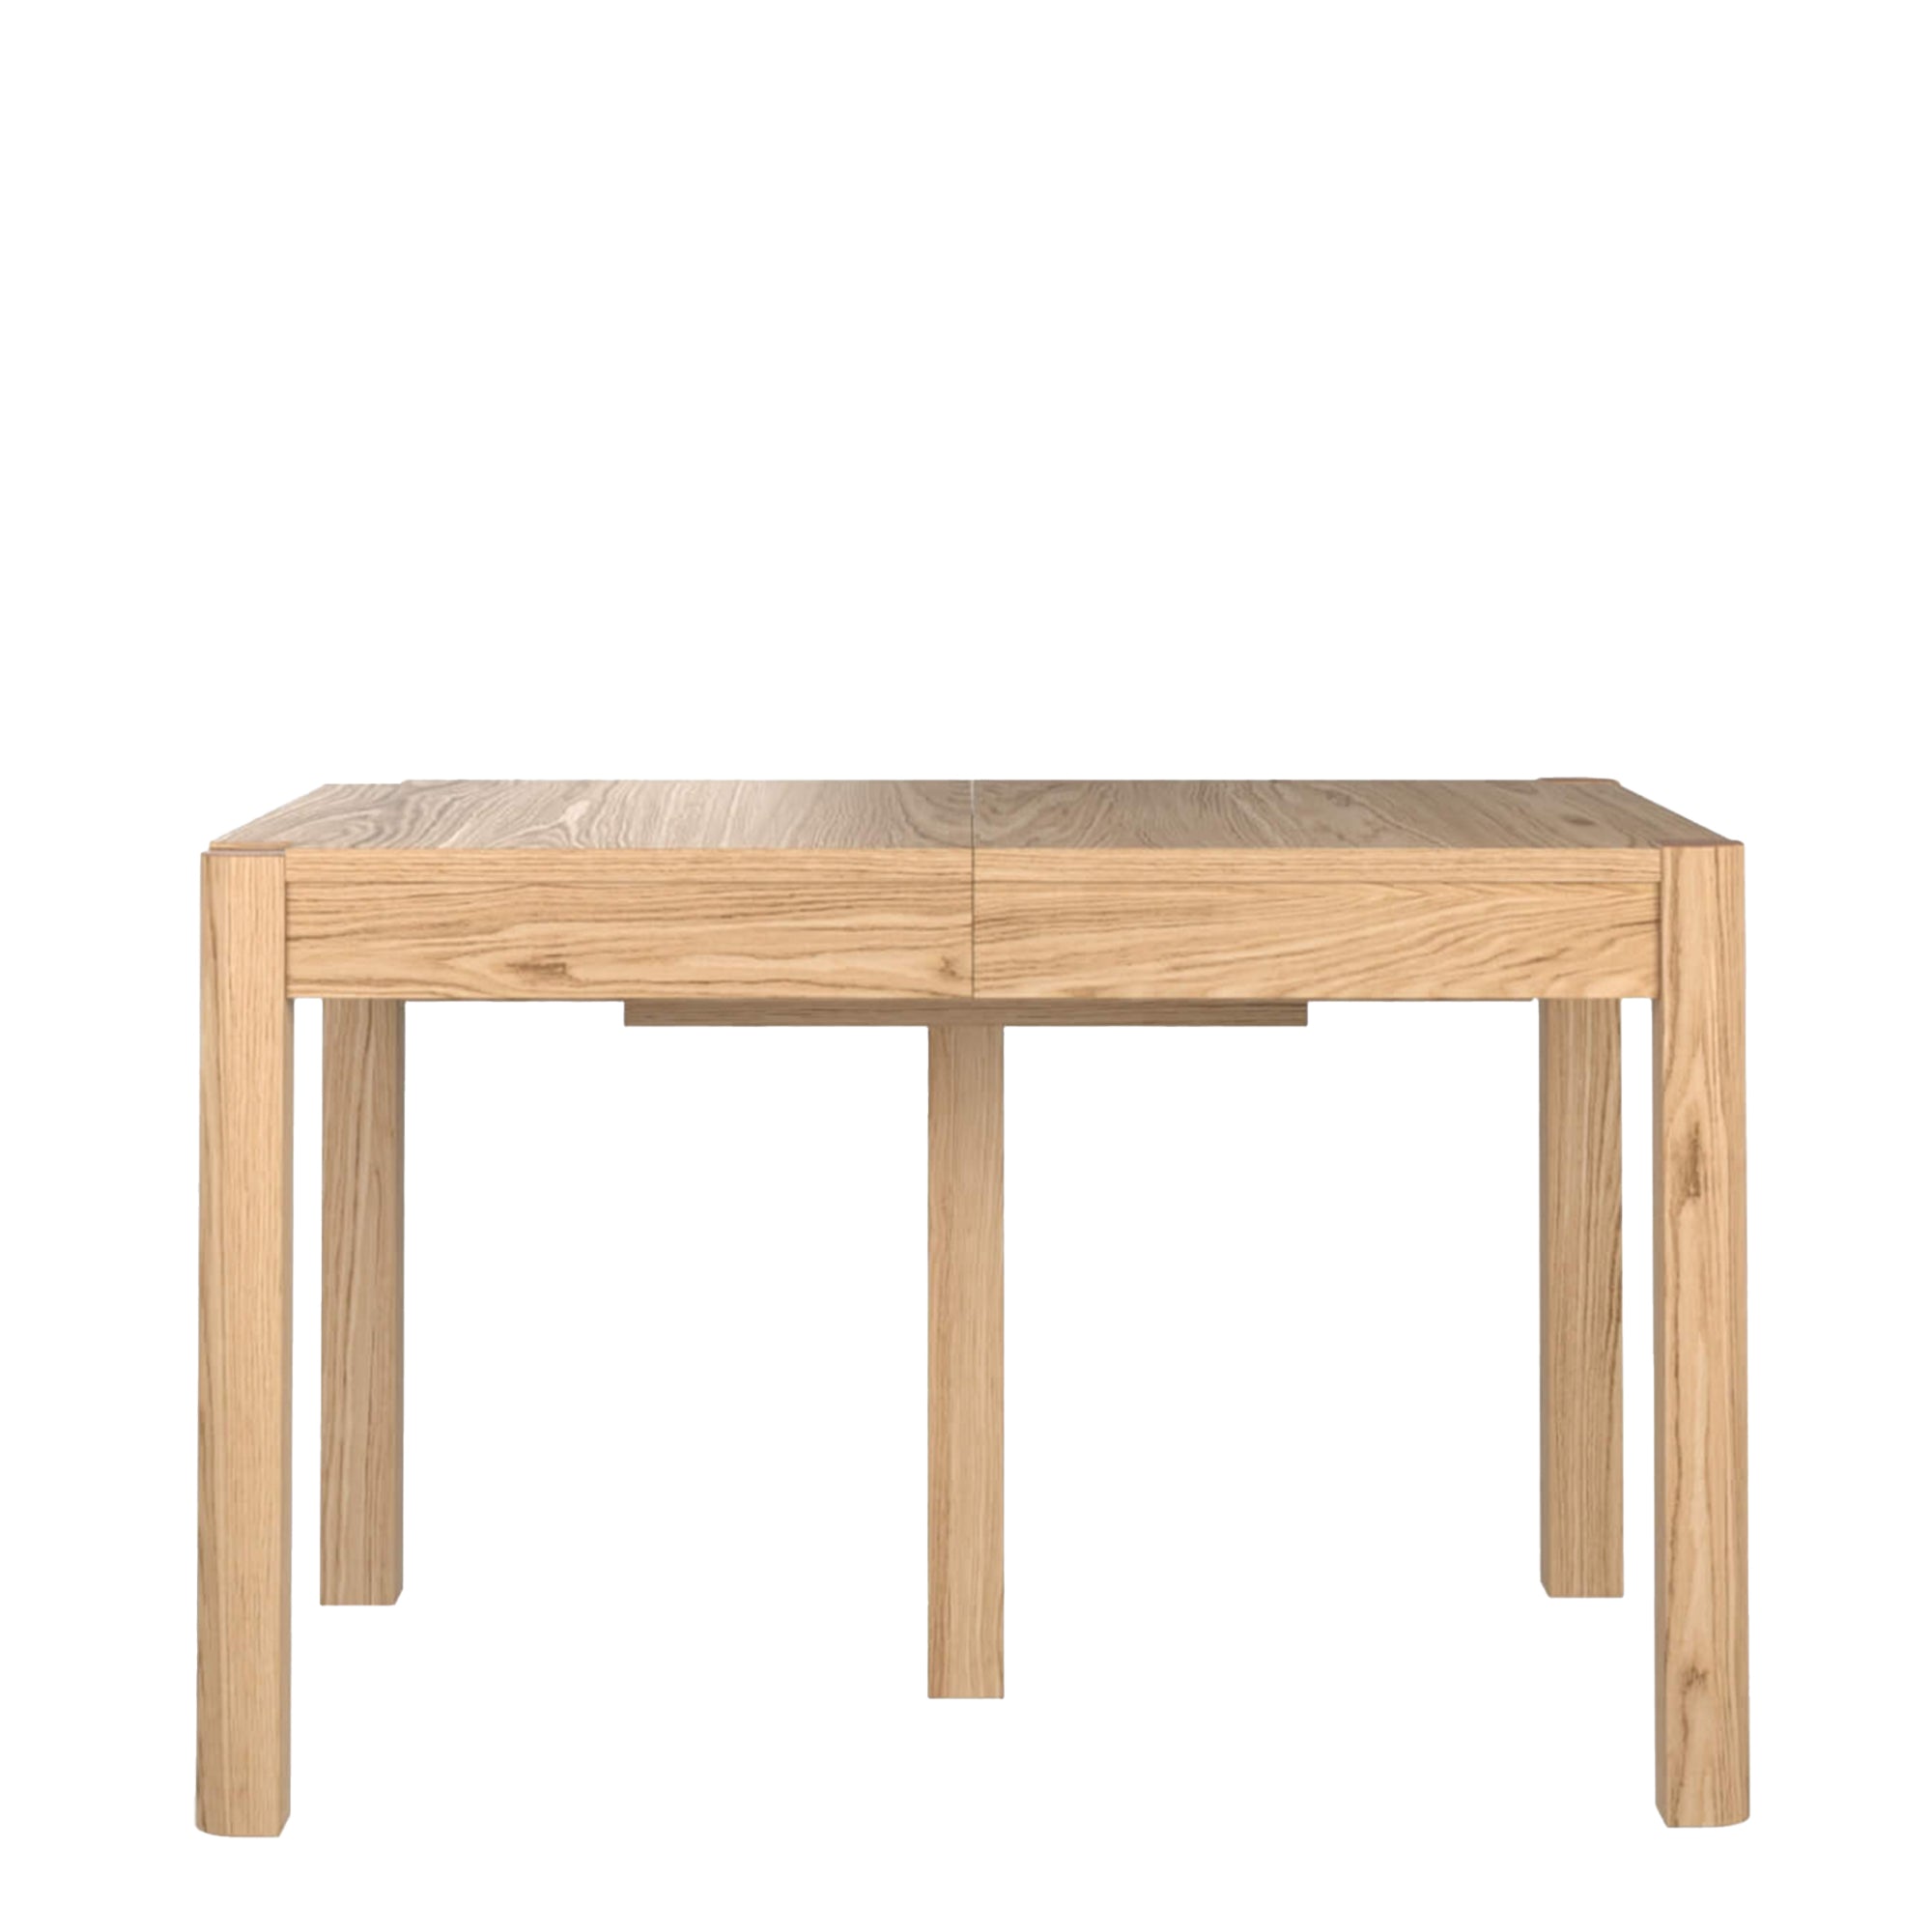 4-8 Seat Extending Dining Table (120-170cm)